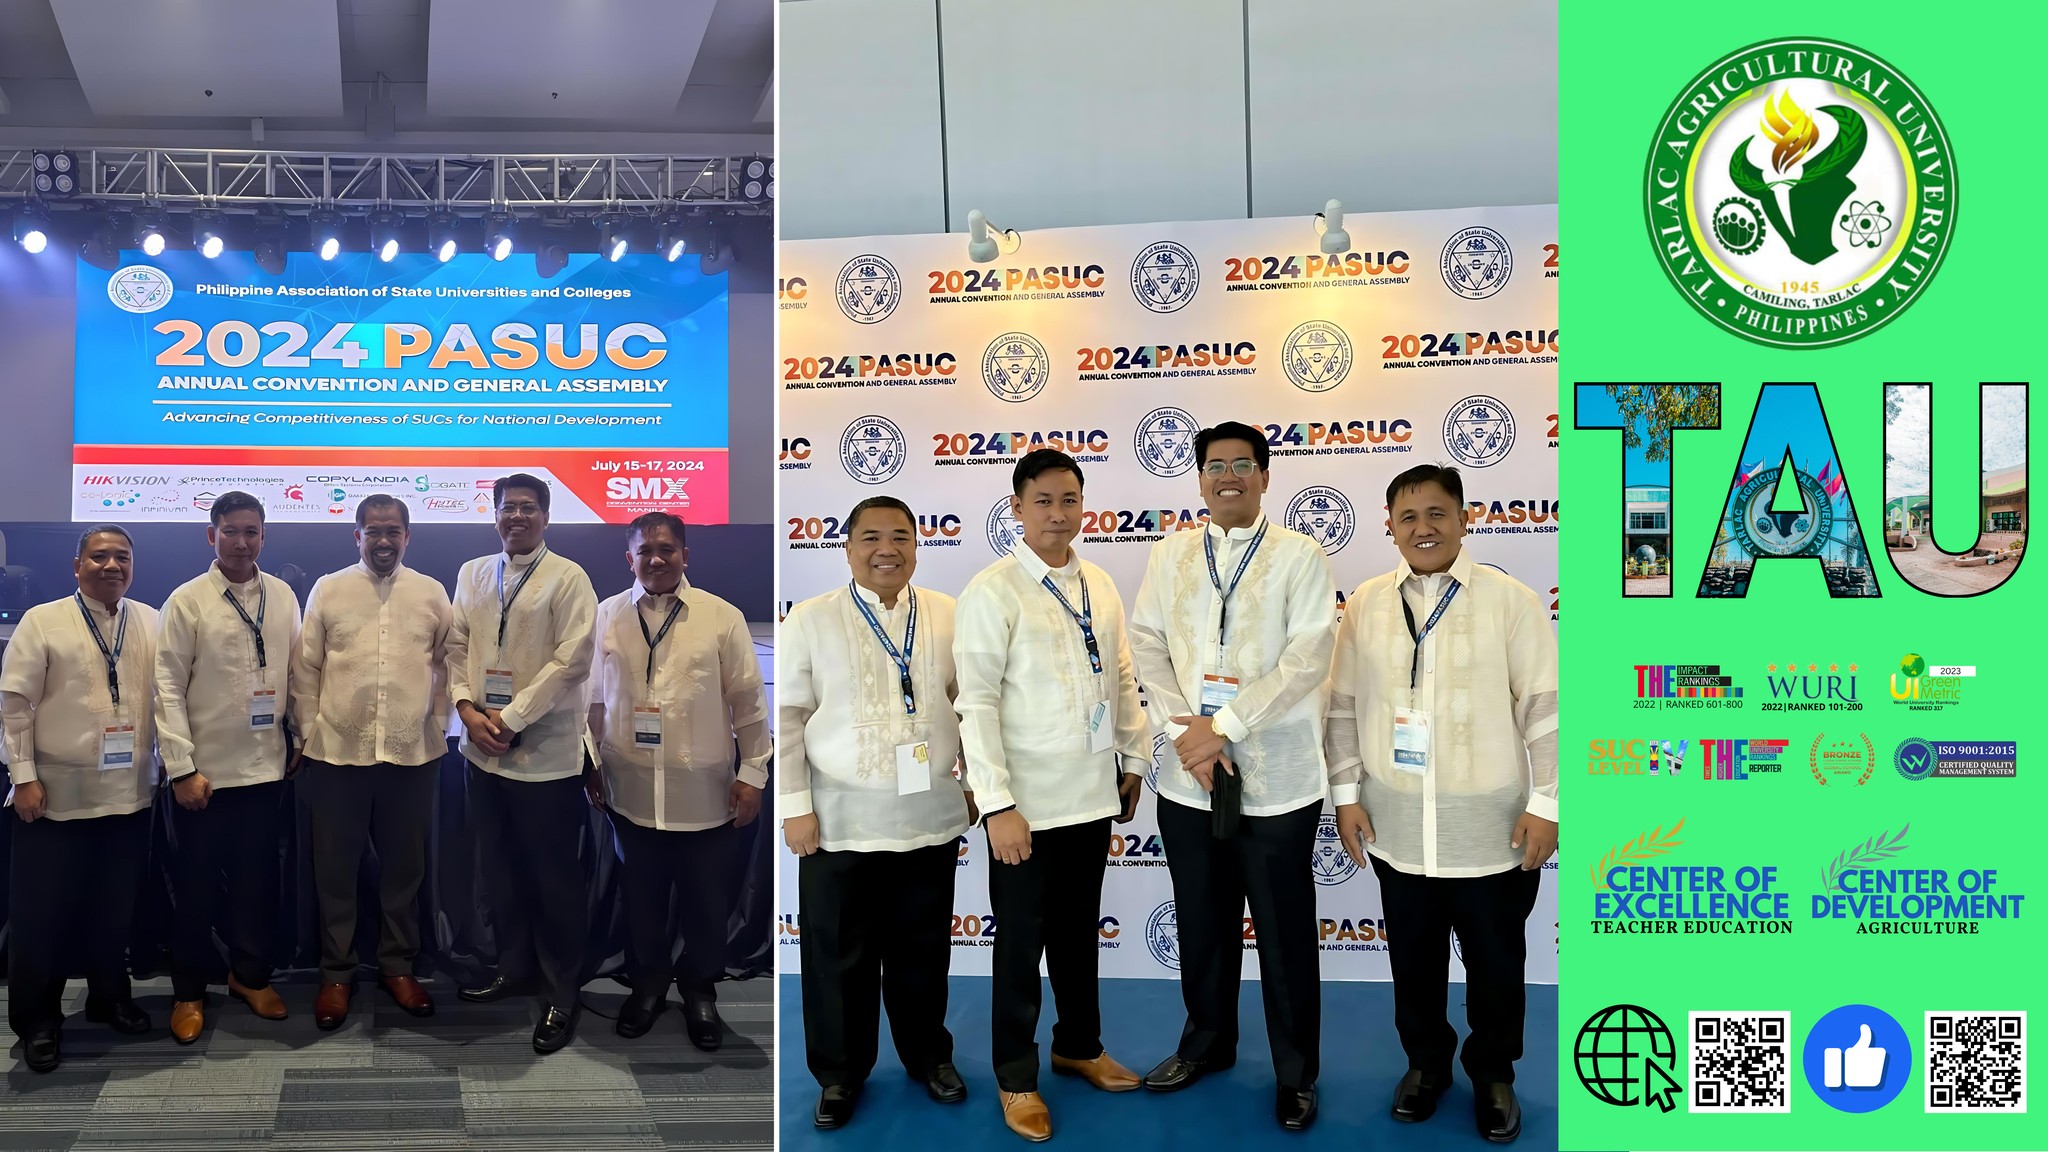 𝐂𝐀𝐏𝐓𝐔𝐑𝐄𝐃 𝐈𝐍 𝐋𝐄𝐍𝐒 | In a bid to foster national development through sustained competitiveness of state universities and colleges (SUCs),  the Philippines Association of State Universities and Colleges (PASUC) holds the Annual Convention and General Assembly  at the SMX Convention Center in Pasay City, 15-17 July, convening SUC Presidents and other University officials from across the nation.